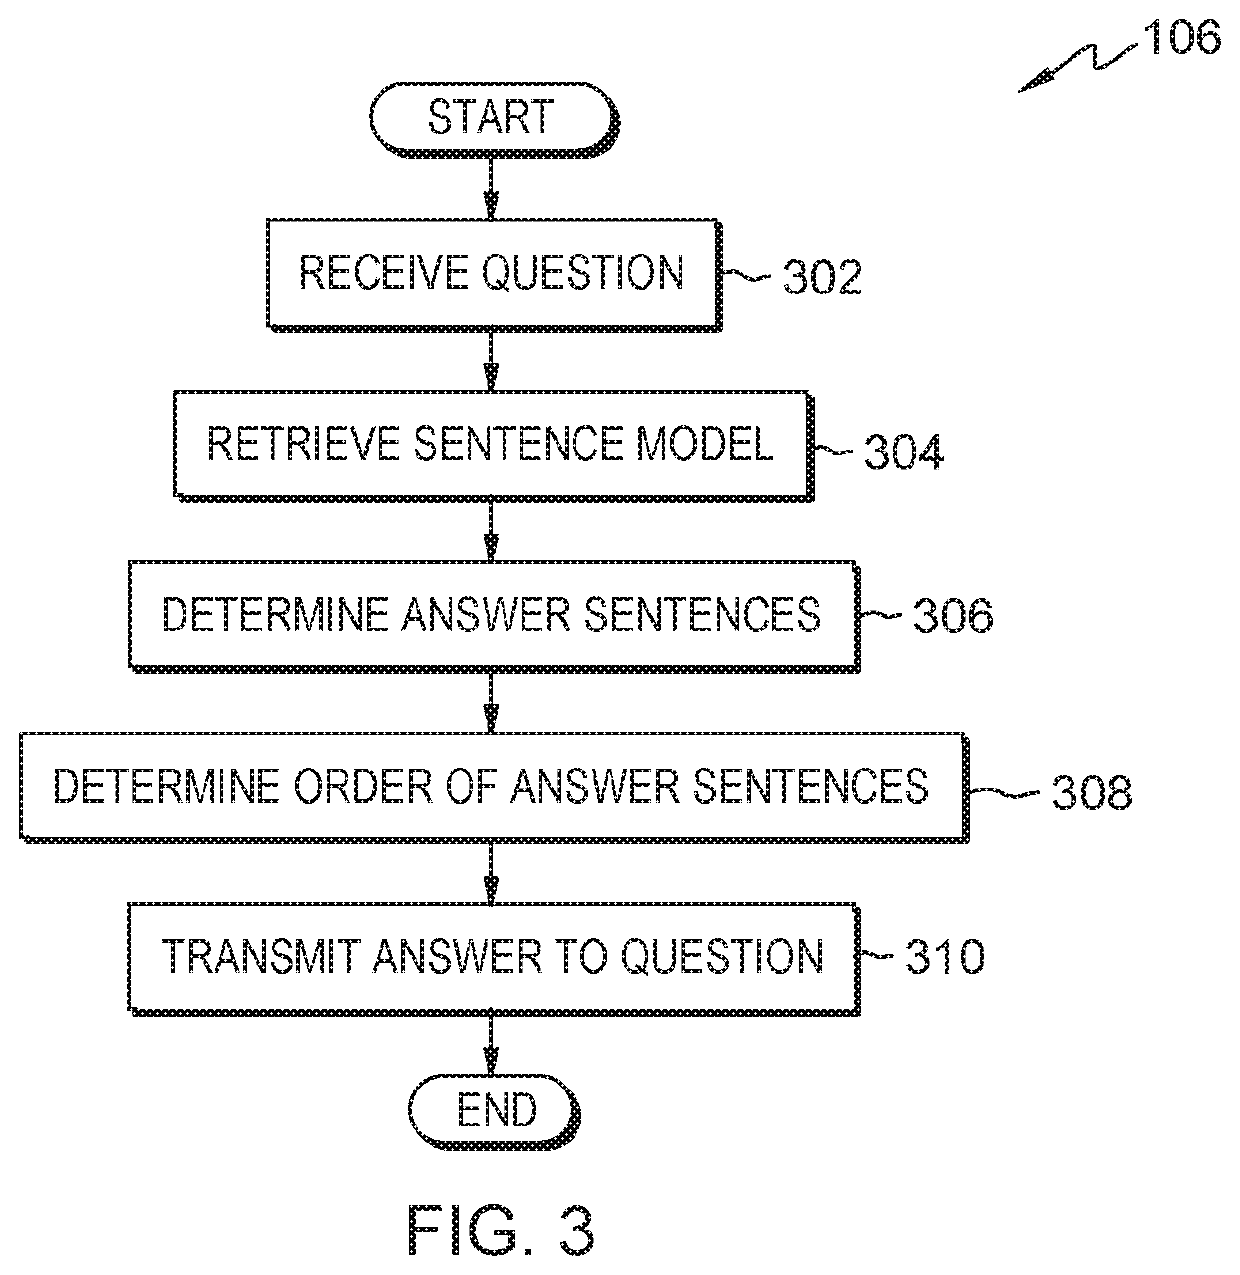 Generating and using a sentence model for answer generation